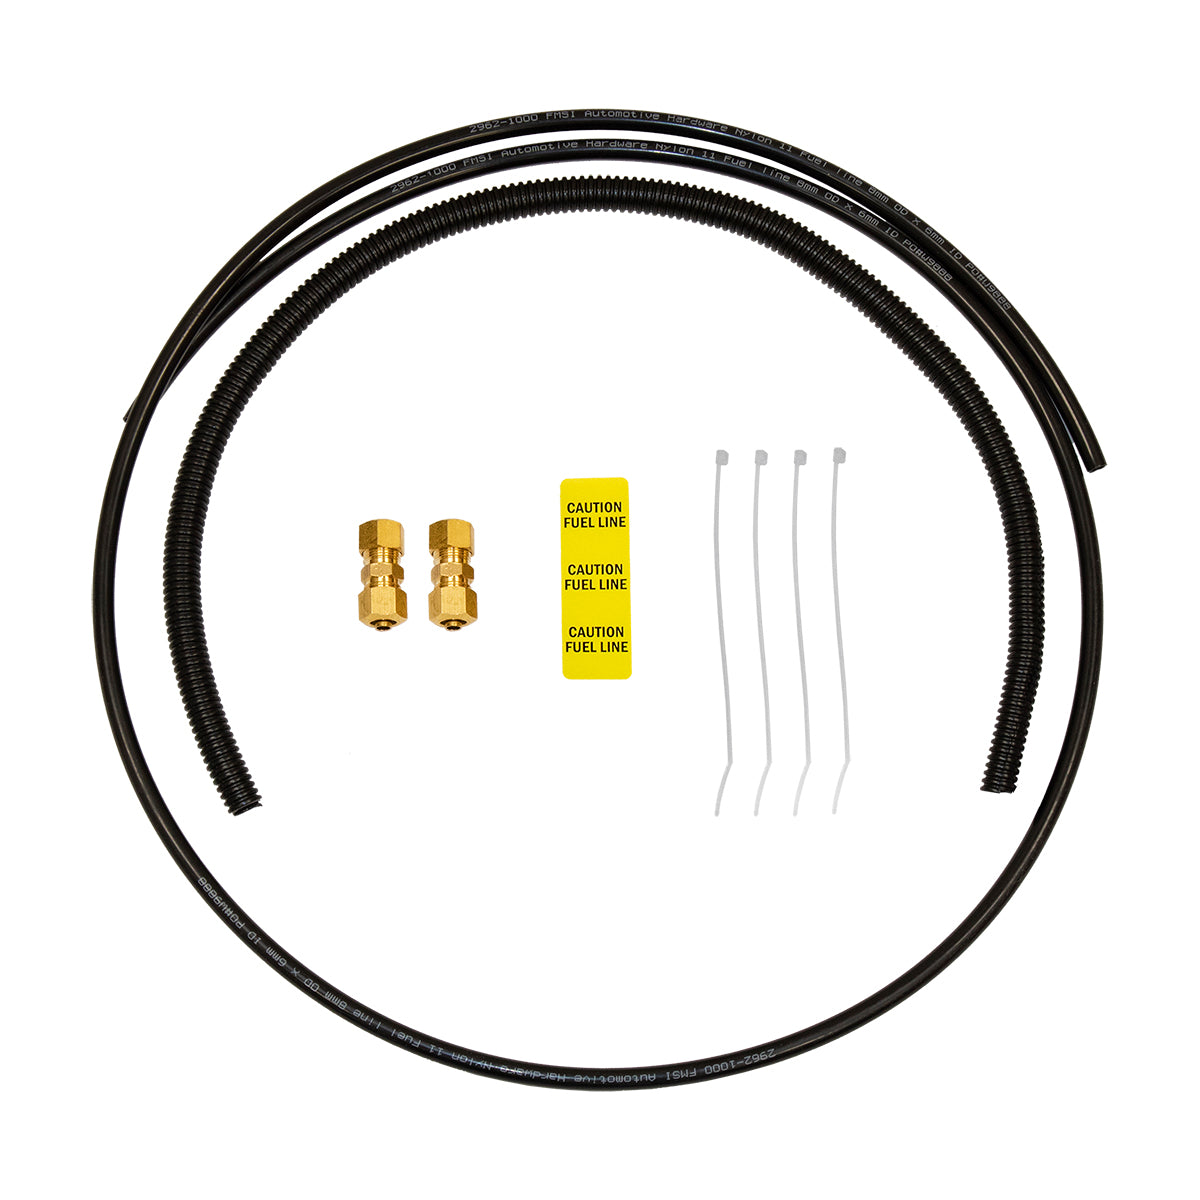 Universal Nylon 5/16 Fuel Injection Line Repair Kit at Inline Tube